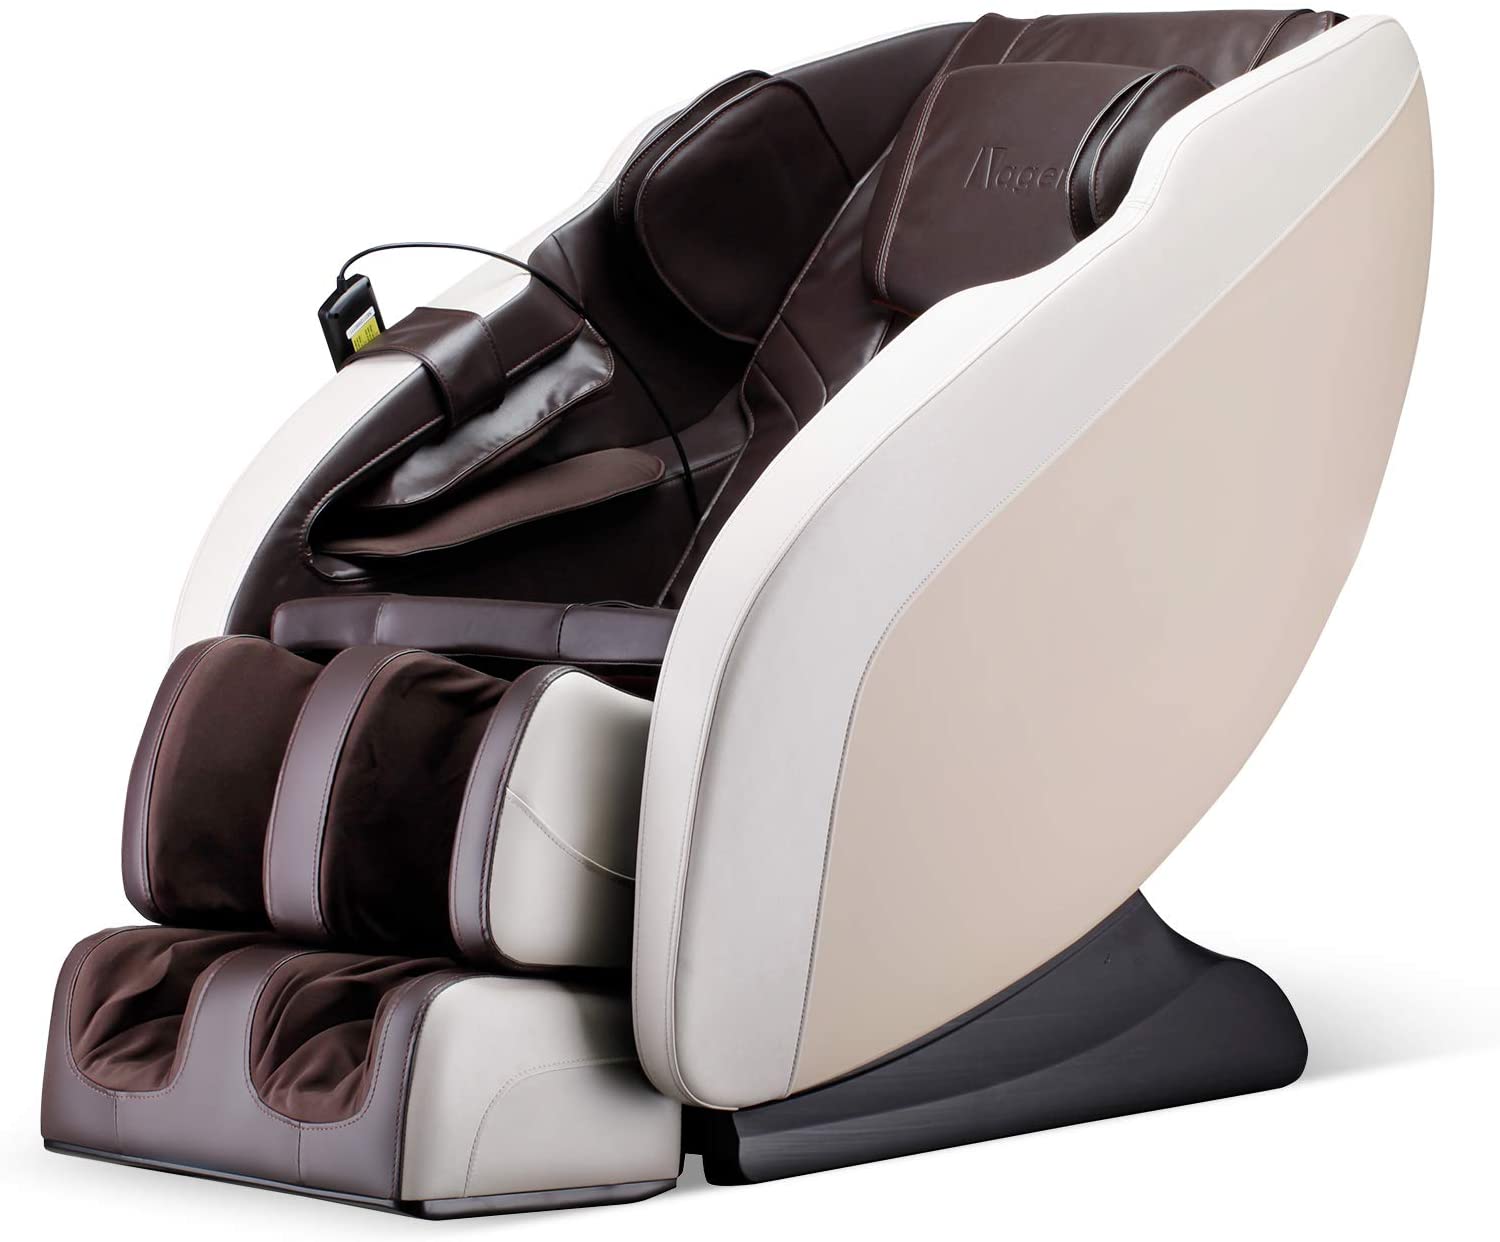 <strong>Mecor Massage Chair, Zero Gravity</strong>